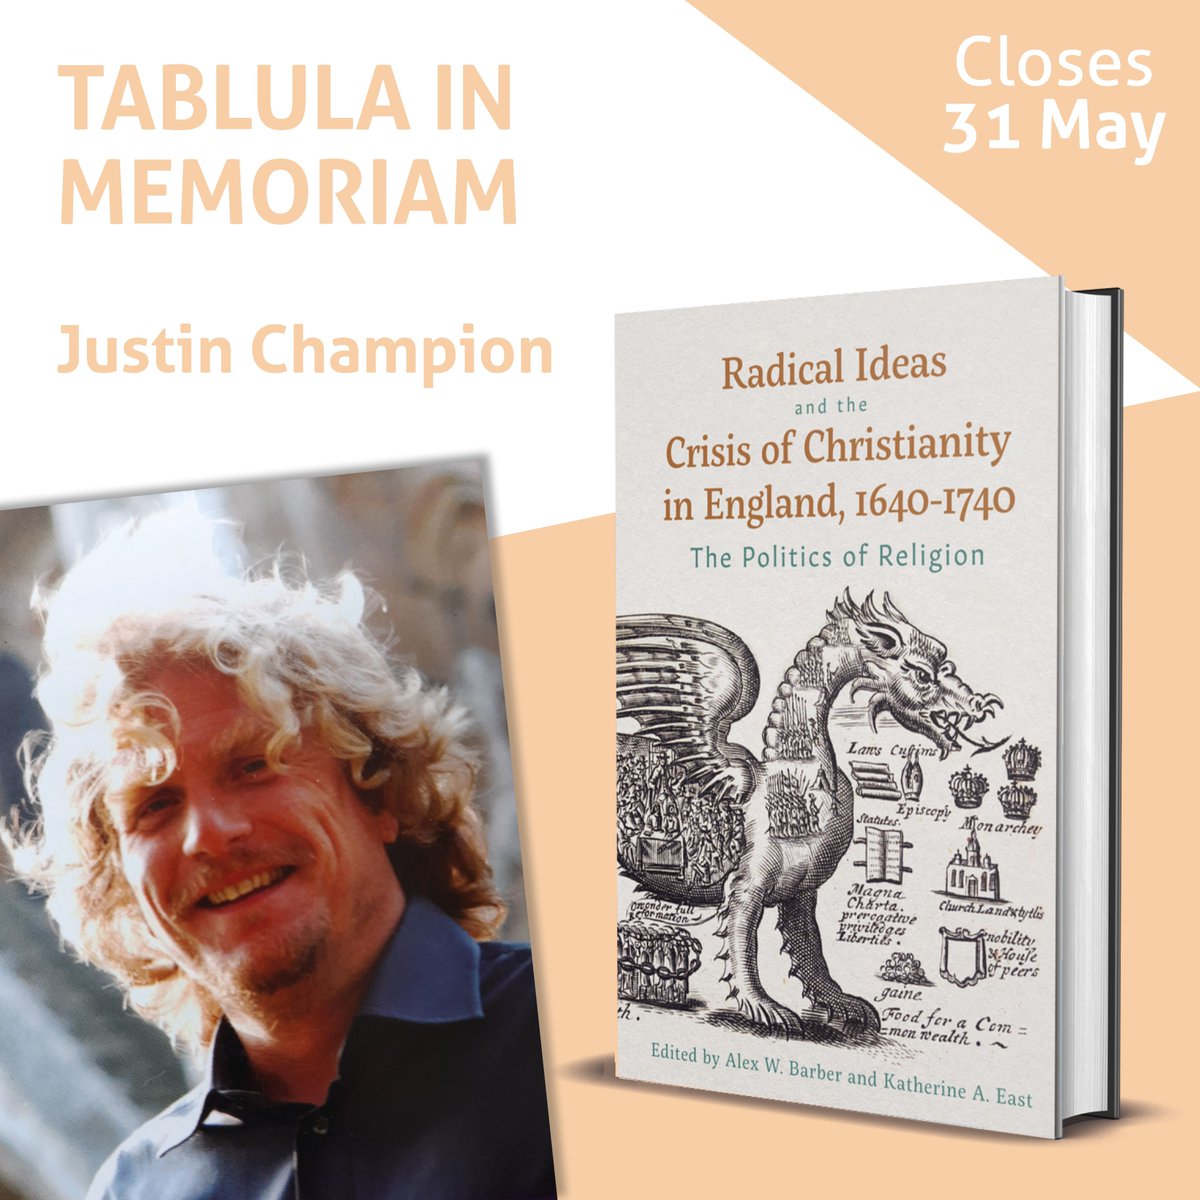 We're celebrating the life and work of the late Justin Champion with a new collection exploring the #Radical ideas of 17th- and 18th-century England. Learn more including how to subscribe to the tabula in memoriam: buff.ly/3QMOLeo @rhammersley99 @TheHistoryWoman